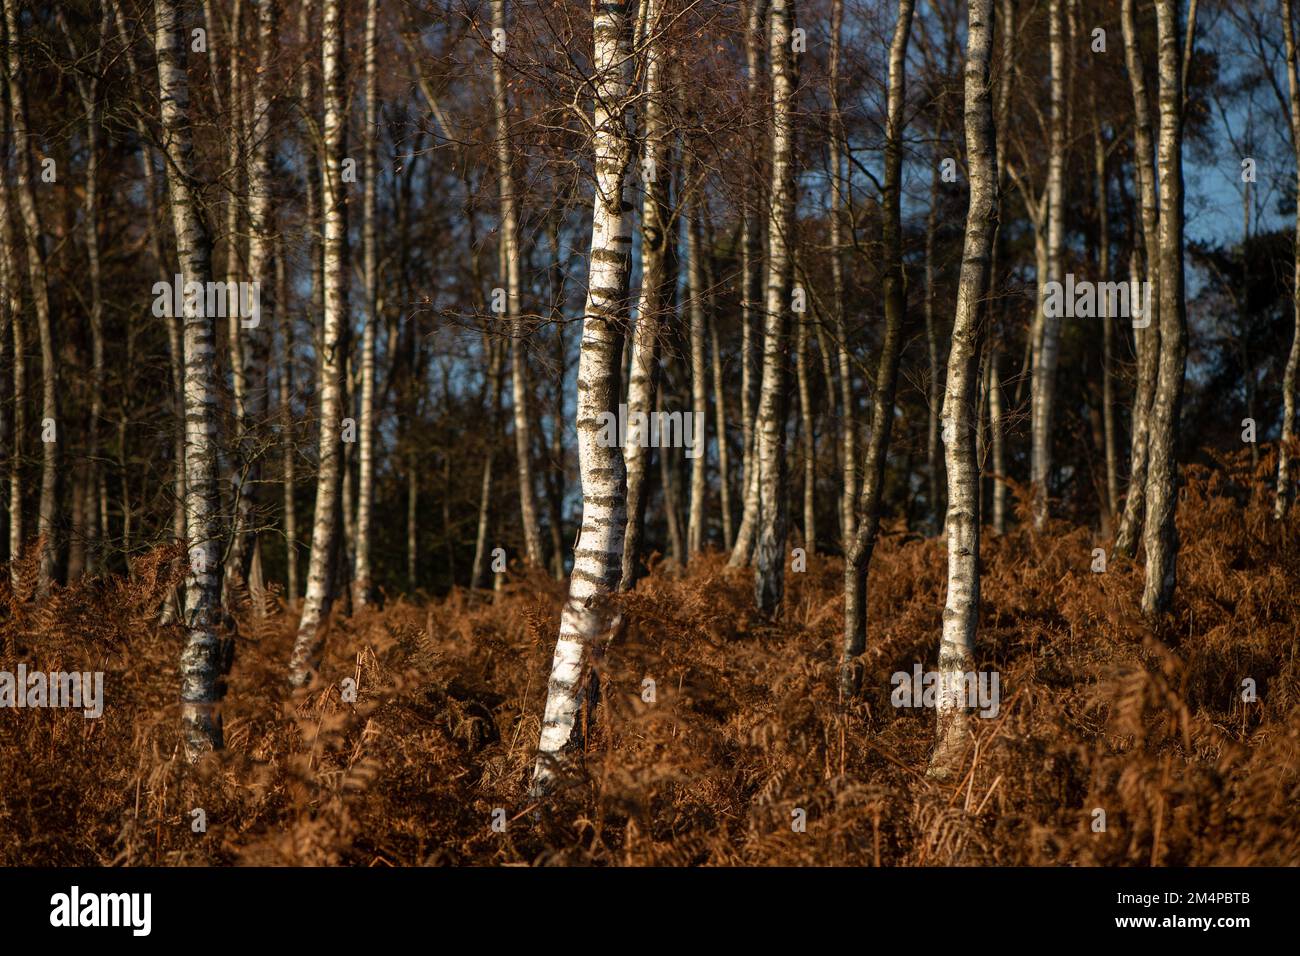 A woodland full of Silver Birch trees showing a contrast with the white bark against the autumnal orange bracken. Edge of New Forest Hampshire UK. Stock Photo